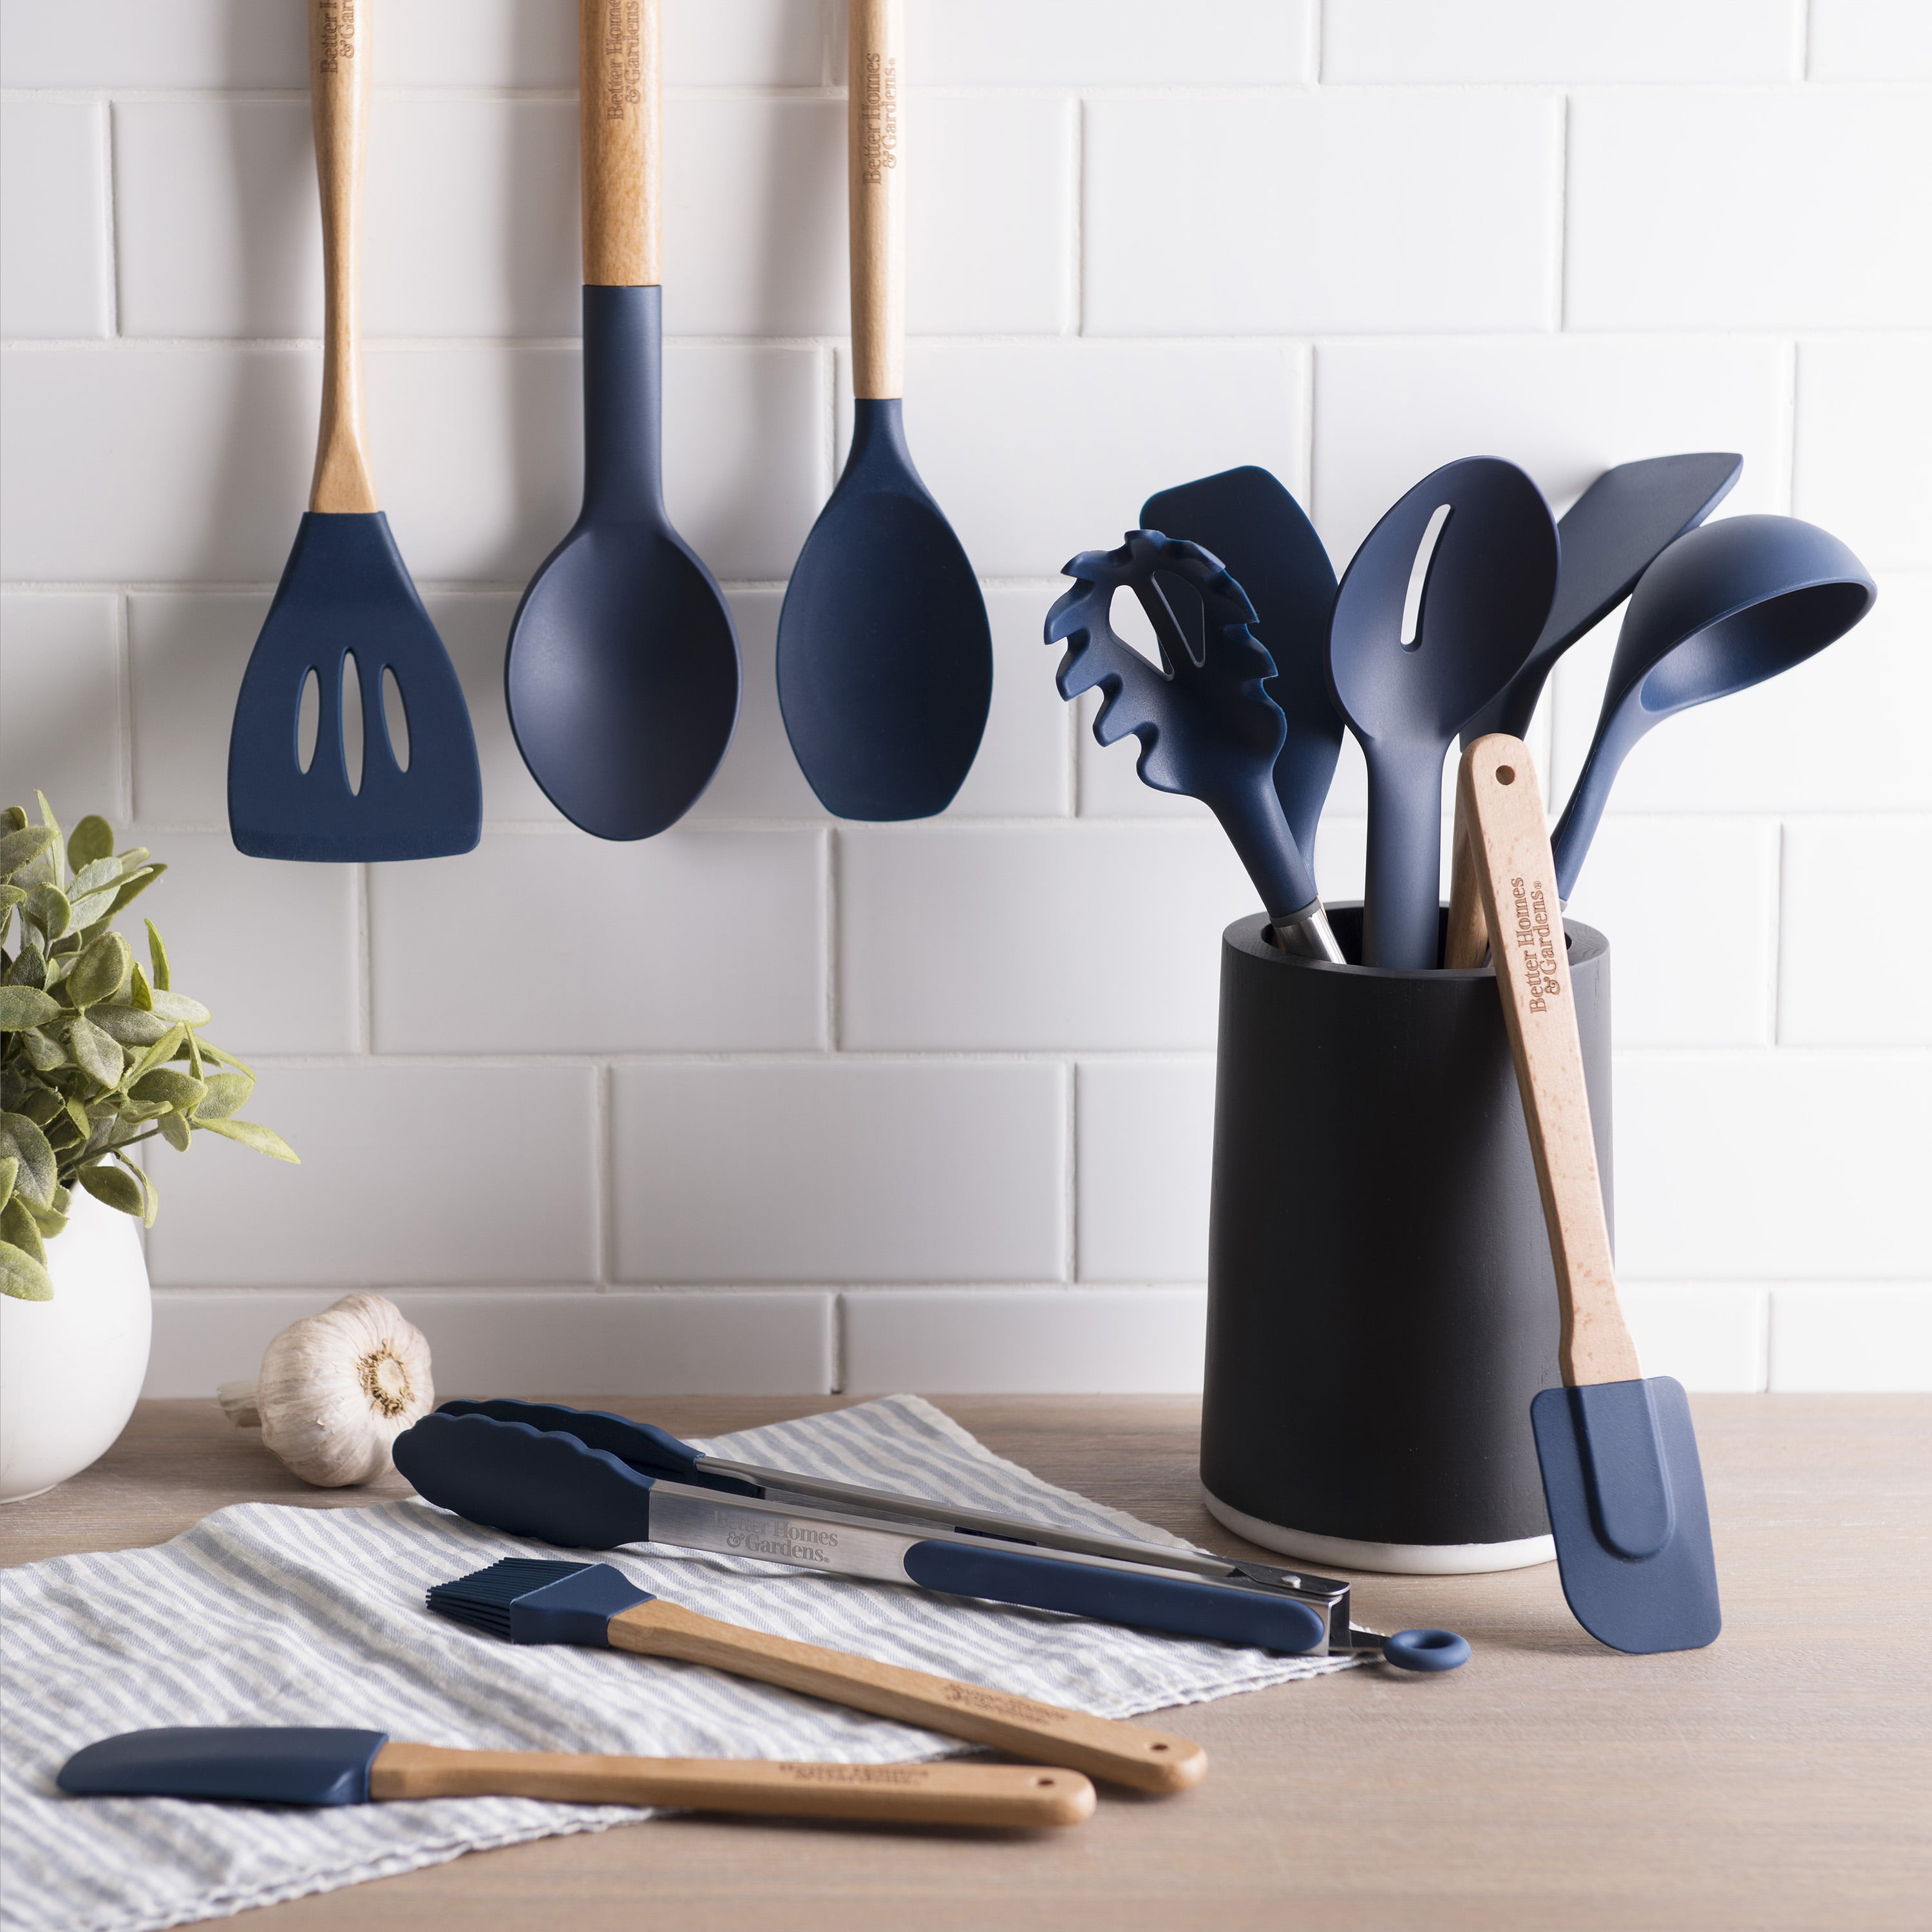 Better Houseware 3500/B 5-Piece Silicone Cooking Utensils (Blue)